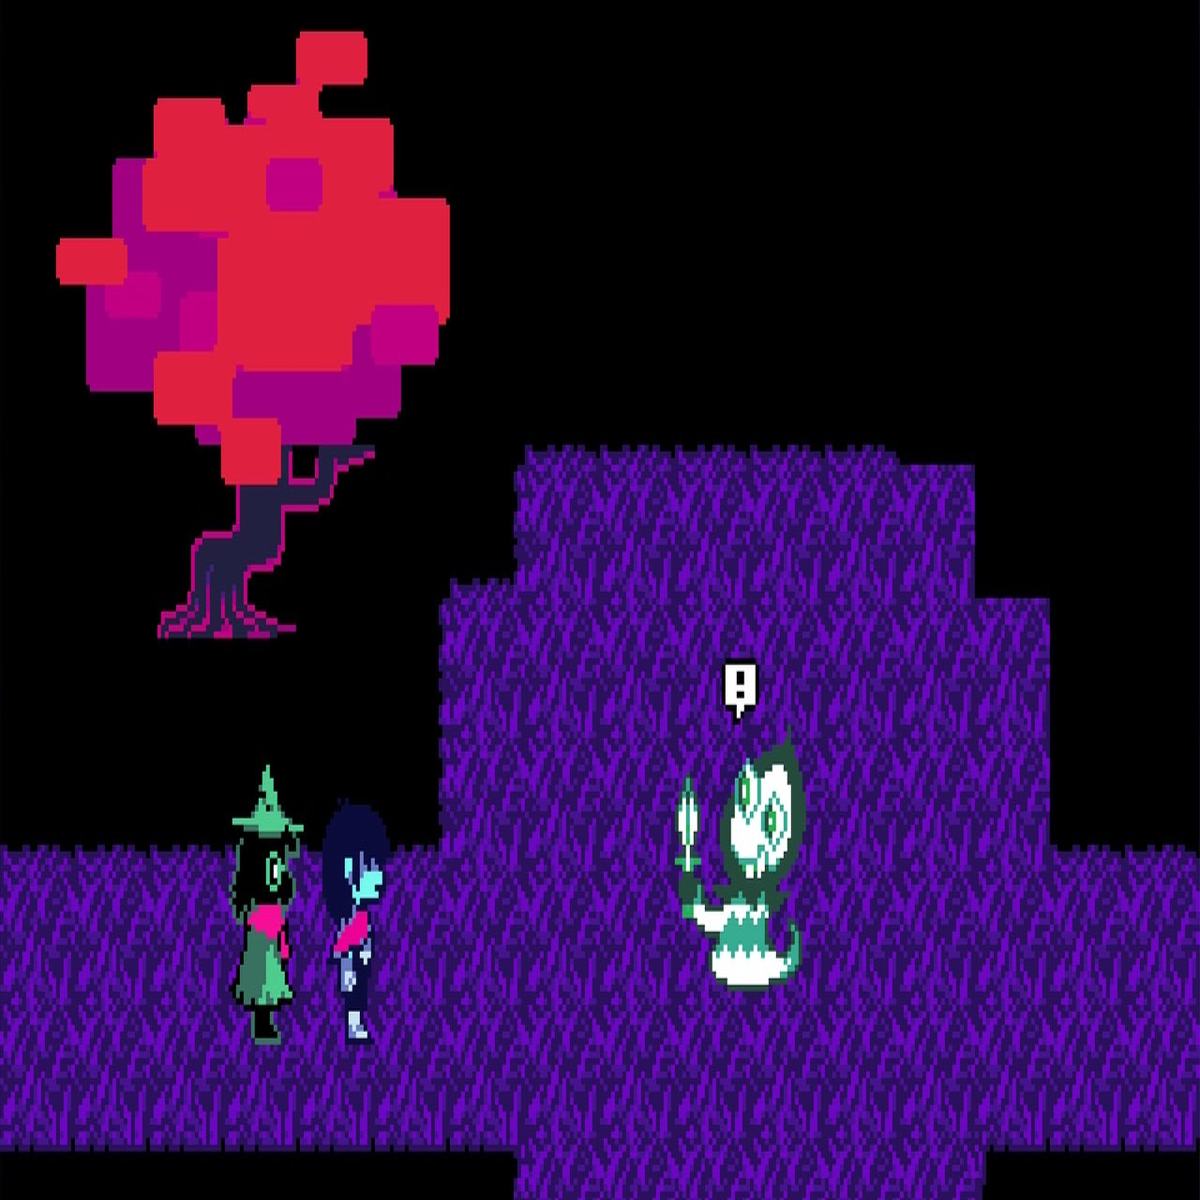 Toby Fox Shares Brief Game Development Update, Says It's Going Well